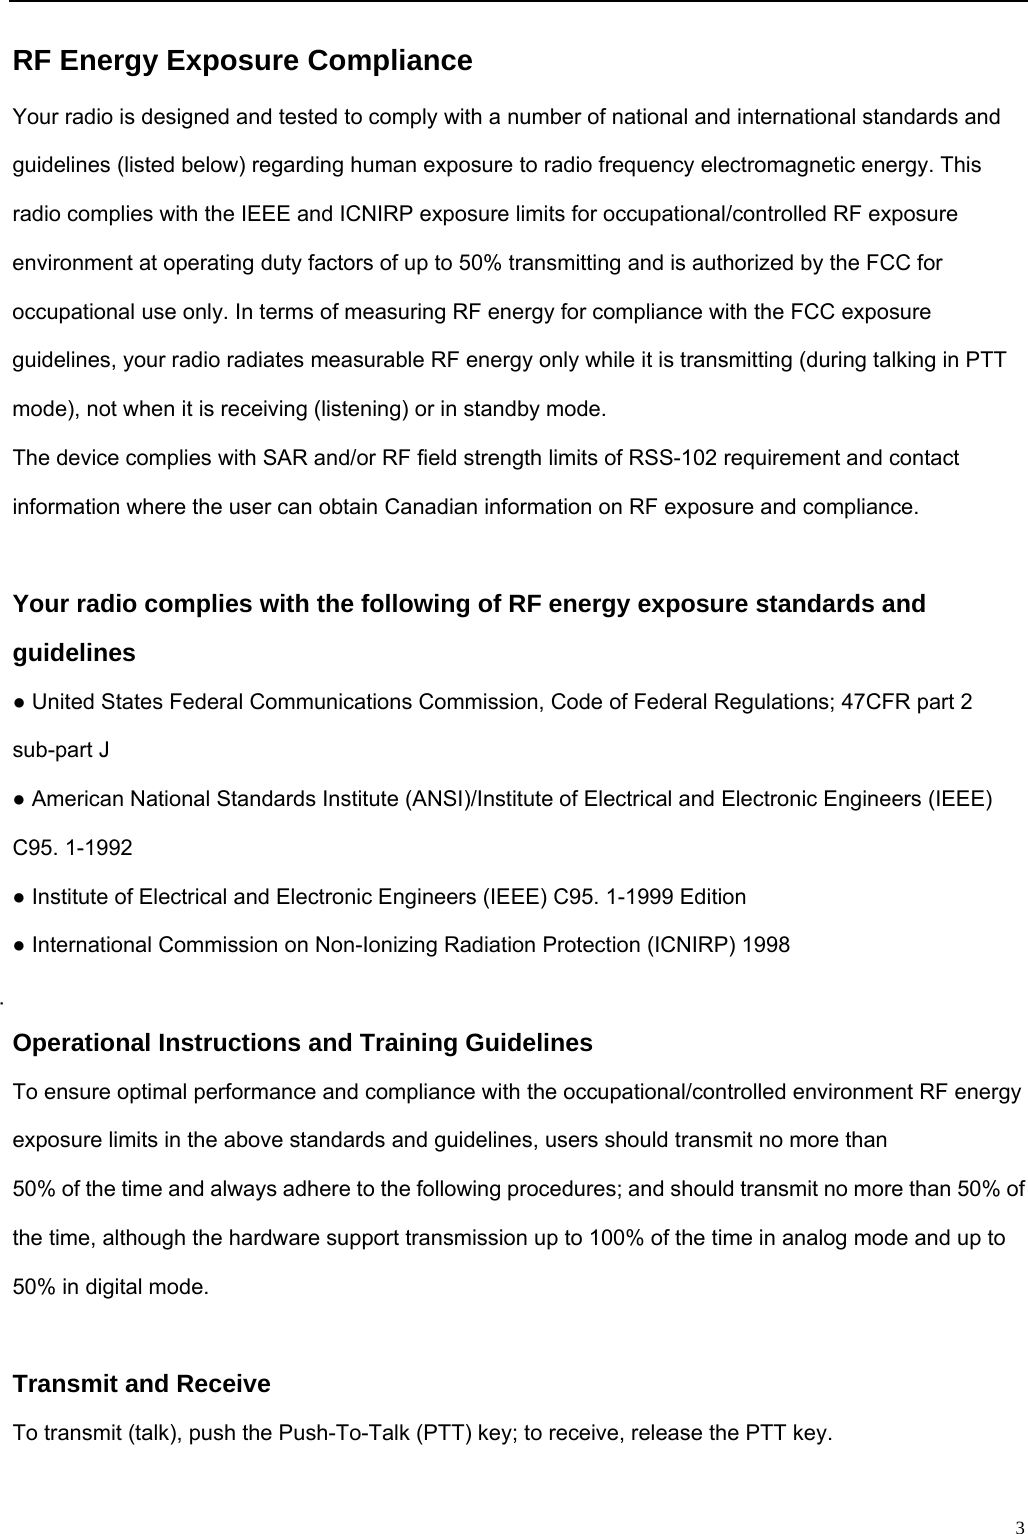                                                                                                              3RF Energy Exposure Compliance Your radio is designed and tested to comply with a number of national and international standards and guidelines (listed below) regarding human exposure to radio frequency electromagnetic energy. This radio complies with the IEEE and ICNIRP exposure limits for occupational/controlled RF exposure environment at operating duty factors of up to 50% transmitting and is authorized by the FCC for occupational use only. In terms of measuring RF energy for compliance with the FCC exposure guidelines, your radio radiates measurable RF energy only while it is transmitting (during talking in PTT mode), not when it is receiving (listening) or in standby mode. The device complies with SAR and/or RF field strength limits of RSS-102 requirement and contact information where the user can obtain Canadian information on RF exposure and compliance.  Your radio complies with the following of RF energy exposure standards and guidelines ● United States Federal Communications Commission, Code of Federal Regulations; 47CFR part 2 sub-part J ● American National Standards Institute (ANSI)/Institute of Electrical and Electronic Engineers (IEEE) C95. 1-1992 ● Institute of Electrical and Electronic Engineers (IEEE) C95. 1-1999 Edition ● International Commission on Non-Ionizing Radiation Protection (ICNIRP) 1998  Operational Instructions and Training Guidelines To ensure optimal performance and compliance with the occupational/controlled environment RF energy exposure limits in the above standards and guidelines, users should transmit no more than 50% of the time and always adhere to the following procedures; and should transmit no more than 50% of the time, although the hardware support transmission up to 100% of the time in analog mode and up to 50% in digital mode.  Transmit and Receive To transmit (talk), push the Push-To-Talk (PTT) key; to receive, release the PTT key.  